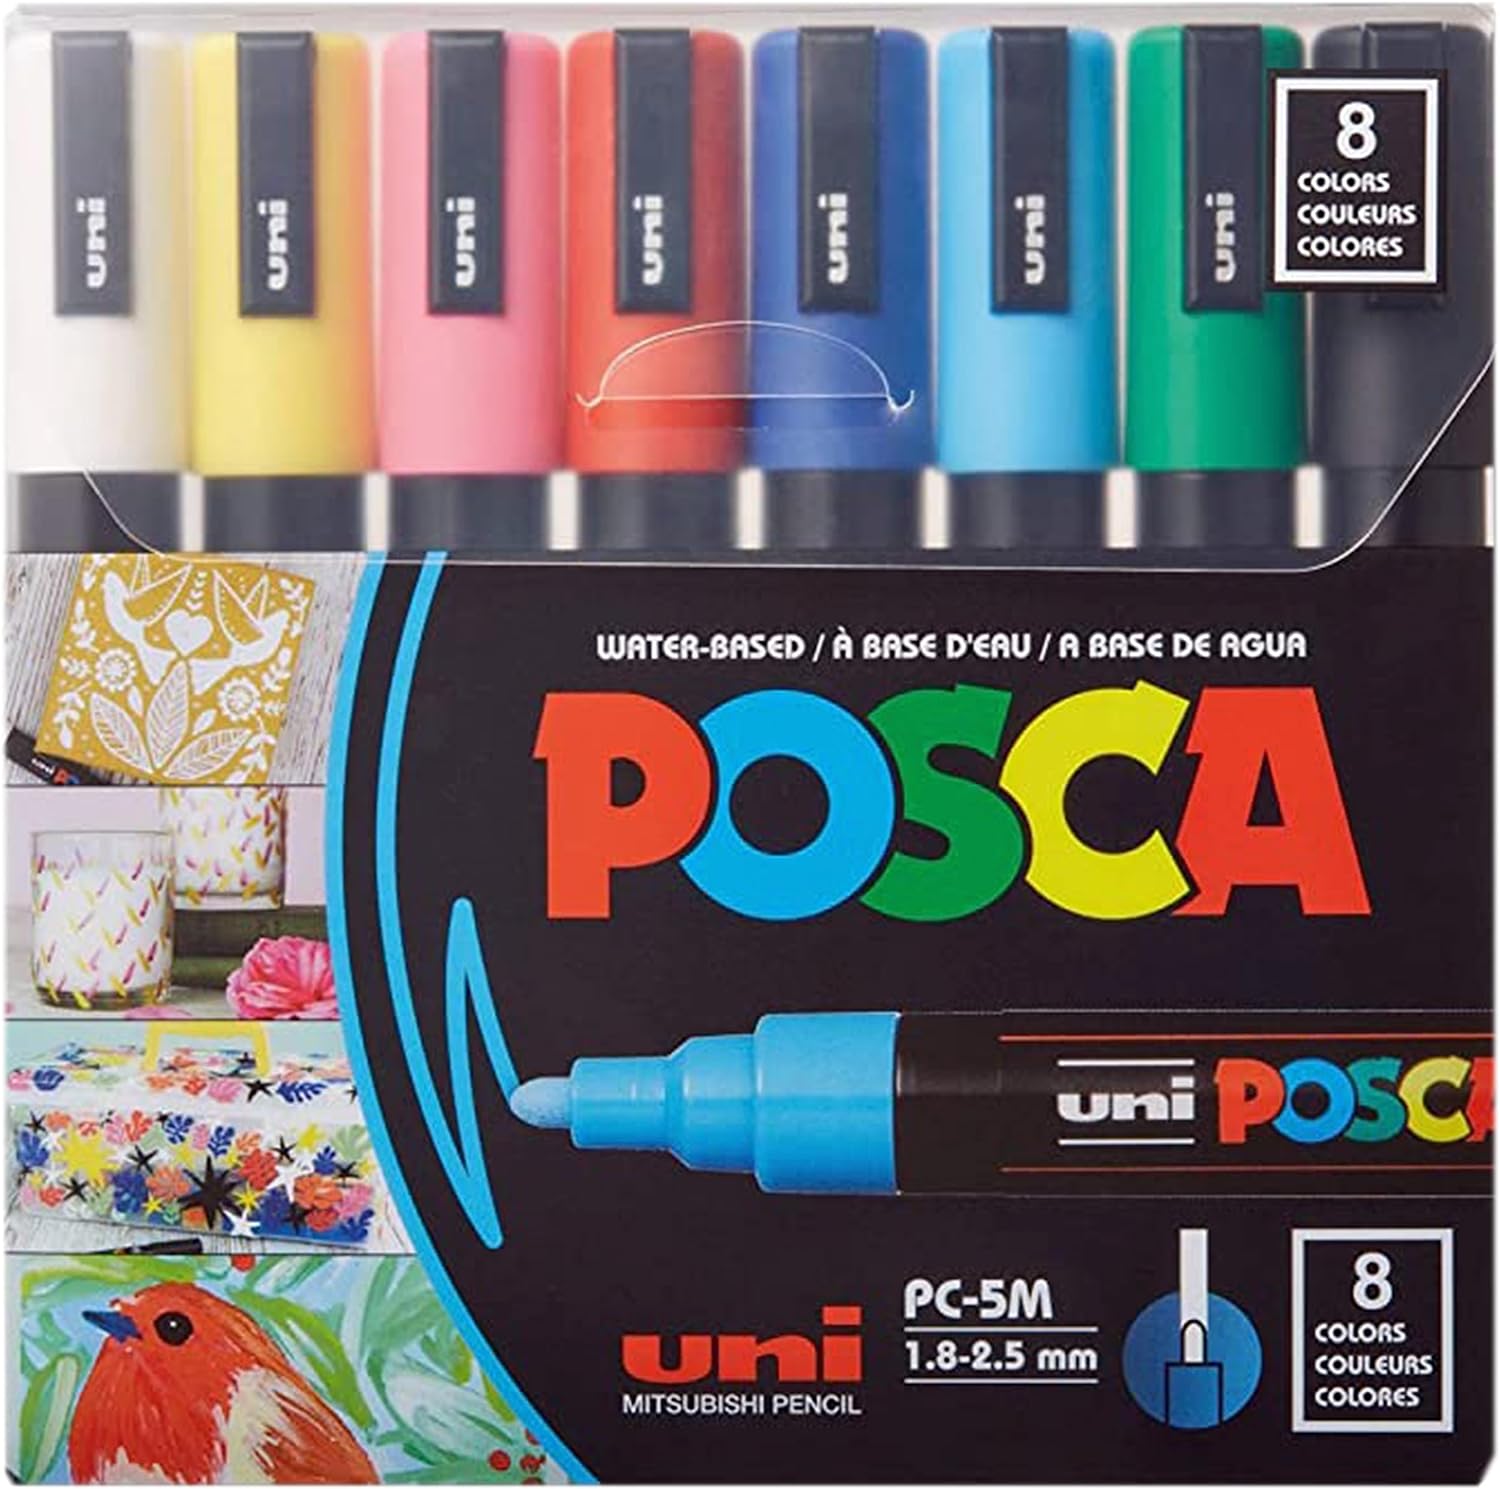 8 Posca Paint Markers, 5M Medium Markers with…